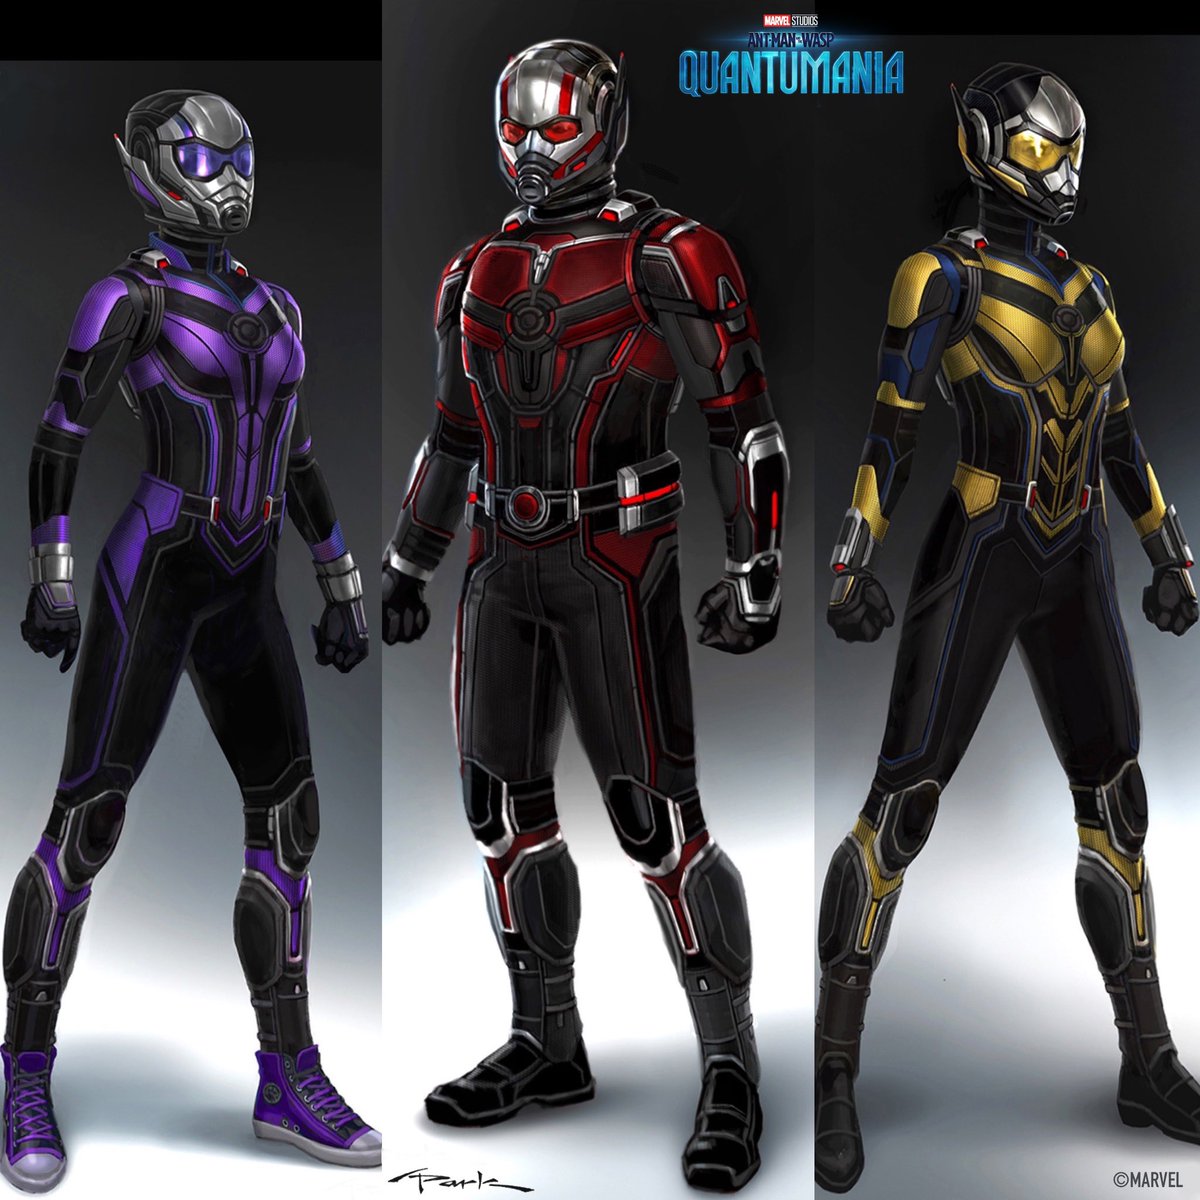 Ant-Man and the Wasp and the Cassie! These were the approved concept designs I had the honor of doing for @MrPeytonReed & @MarvelStudios on #AntManAndTheWaspQuantumania